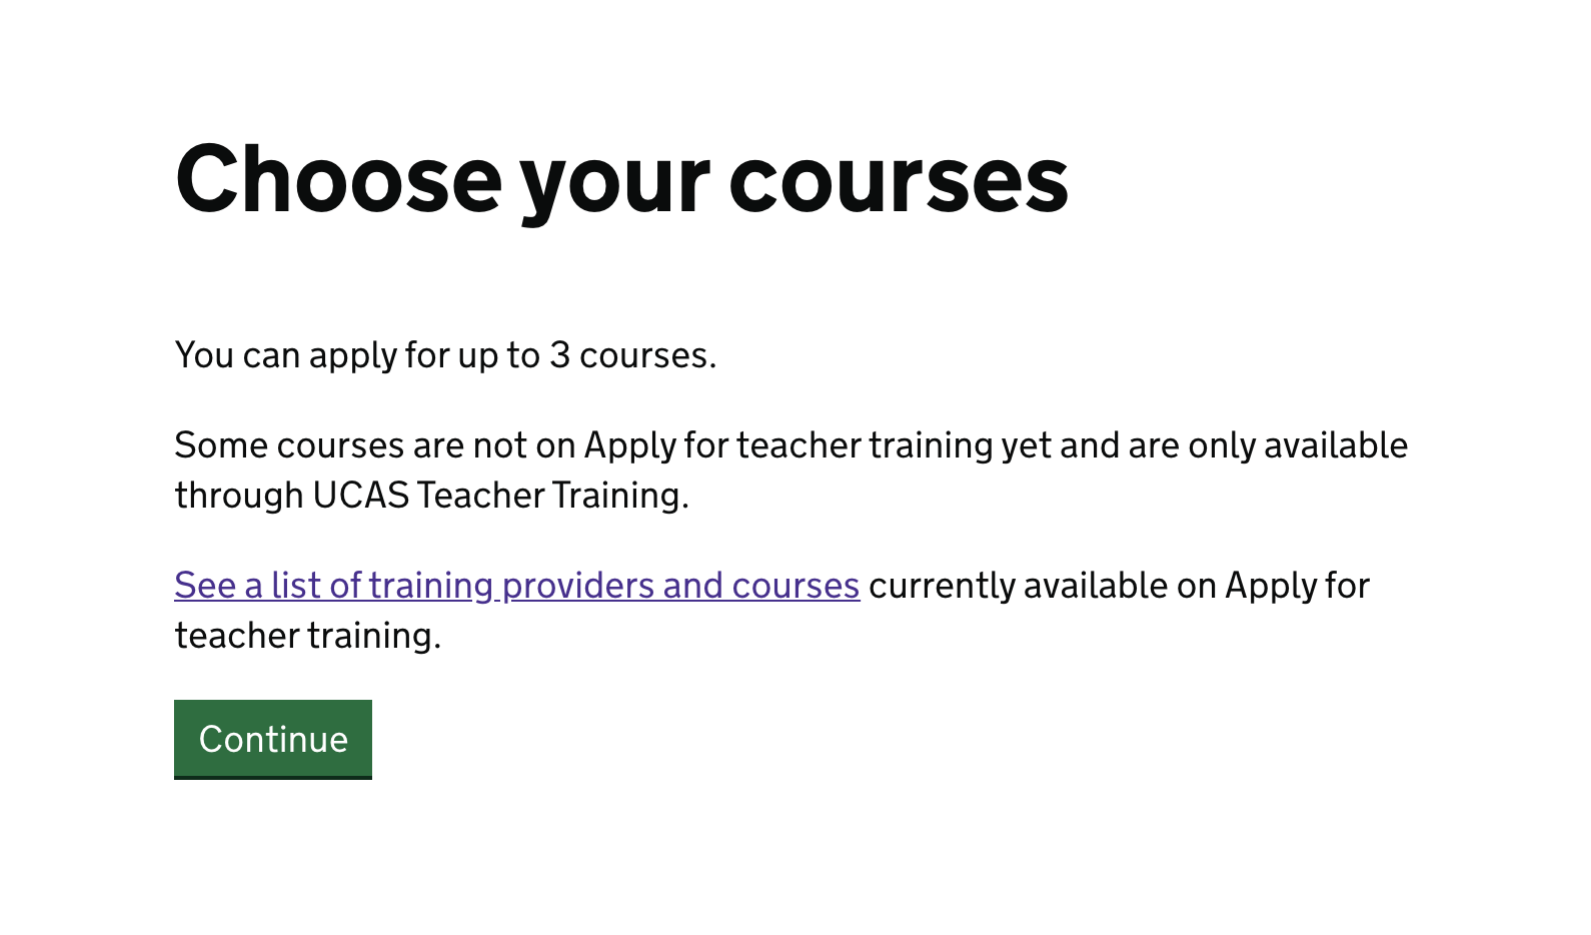 Screenshot of 'Choose your courses' page.